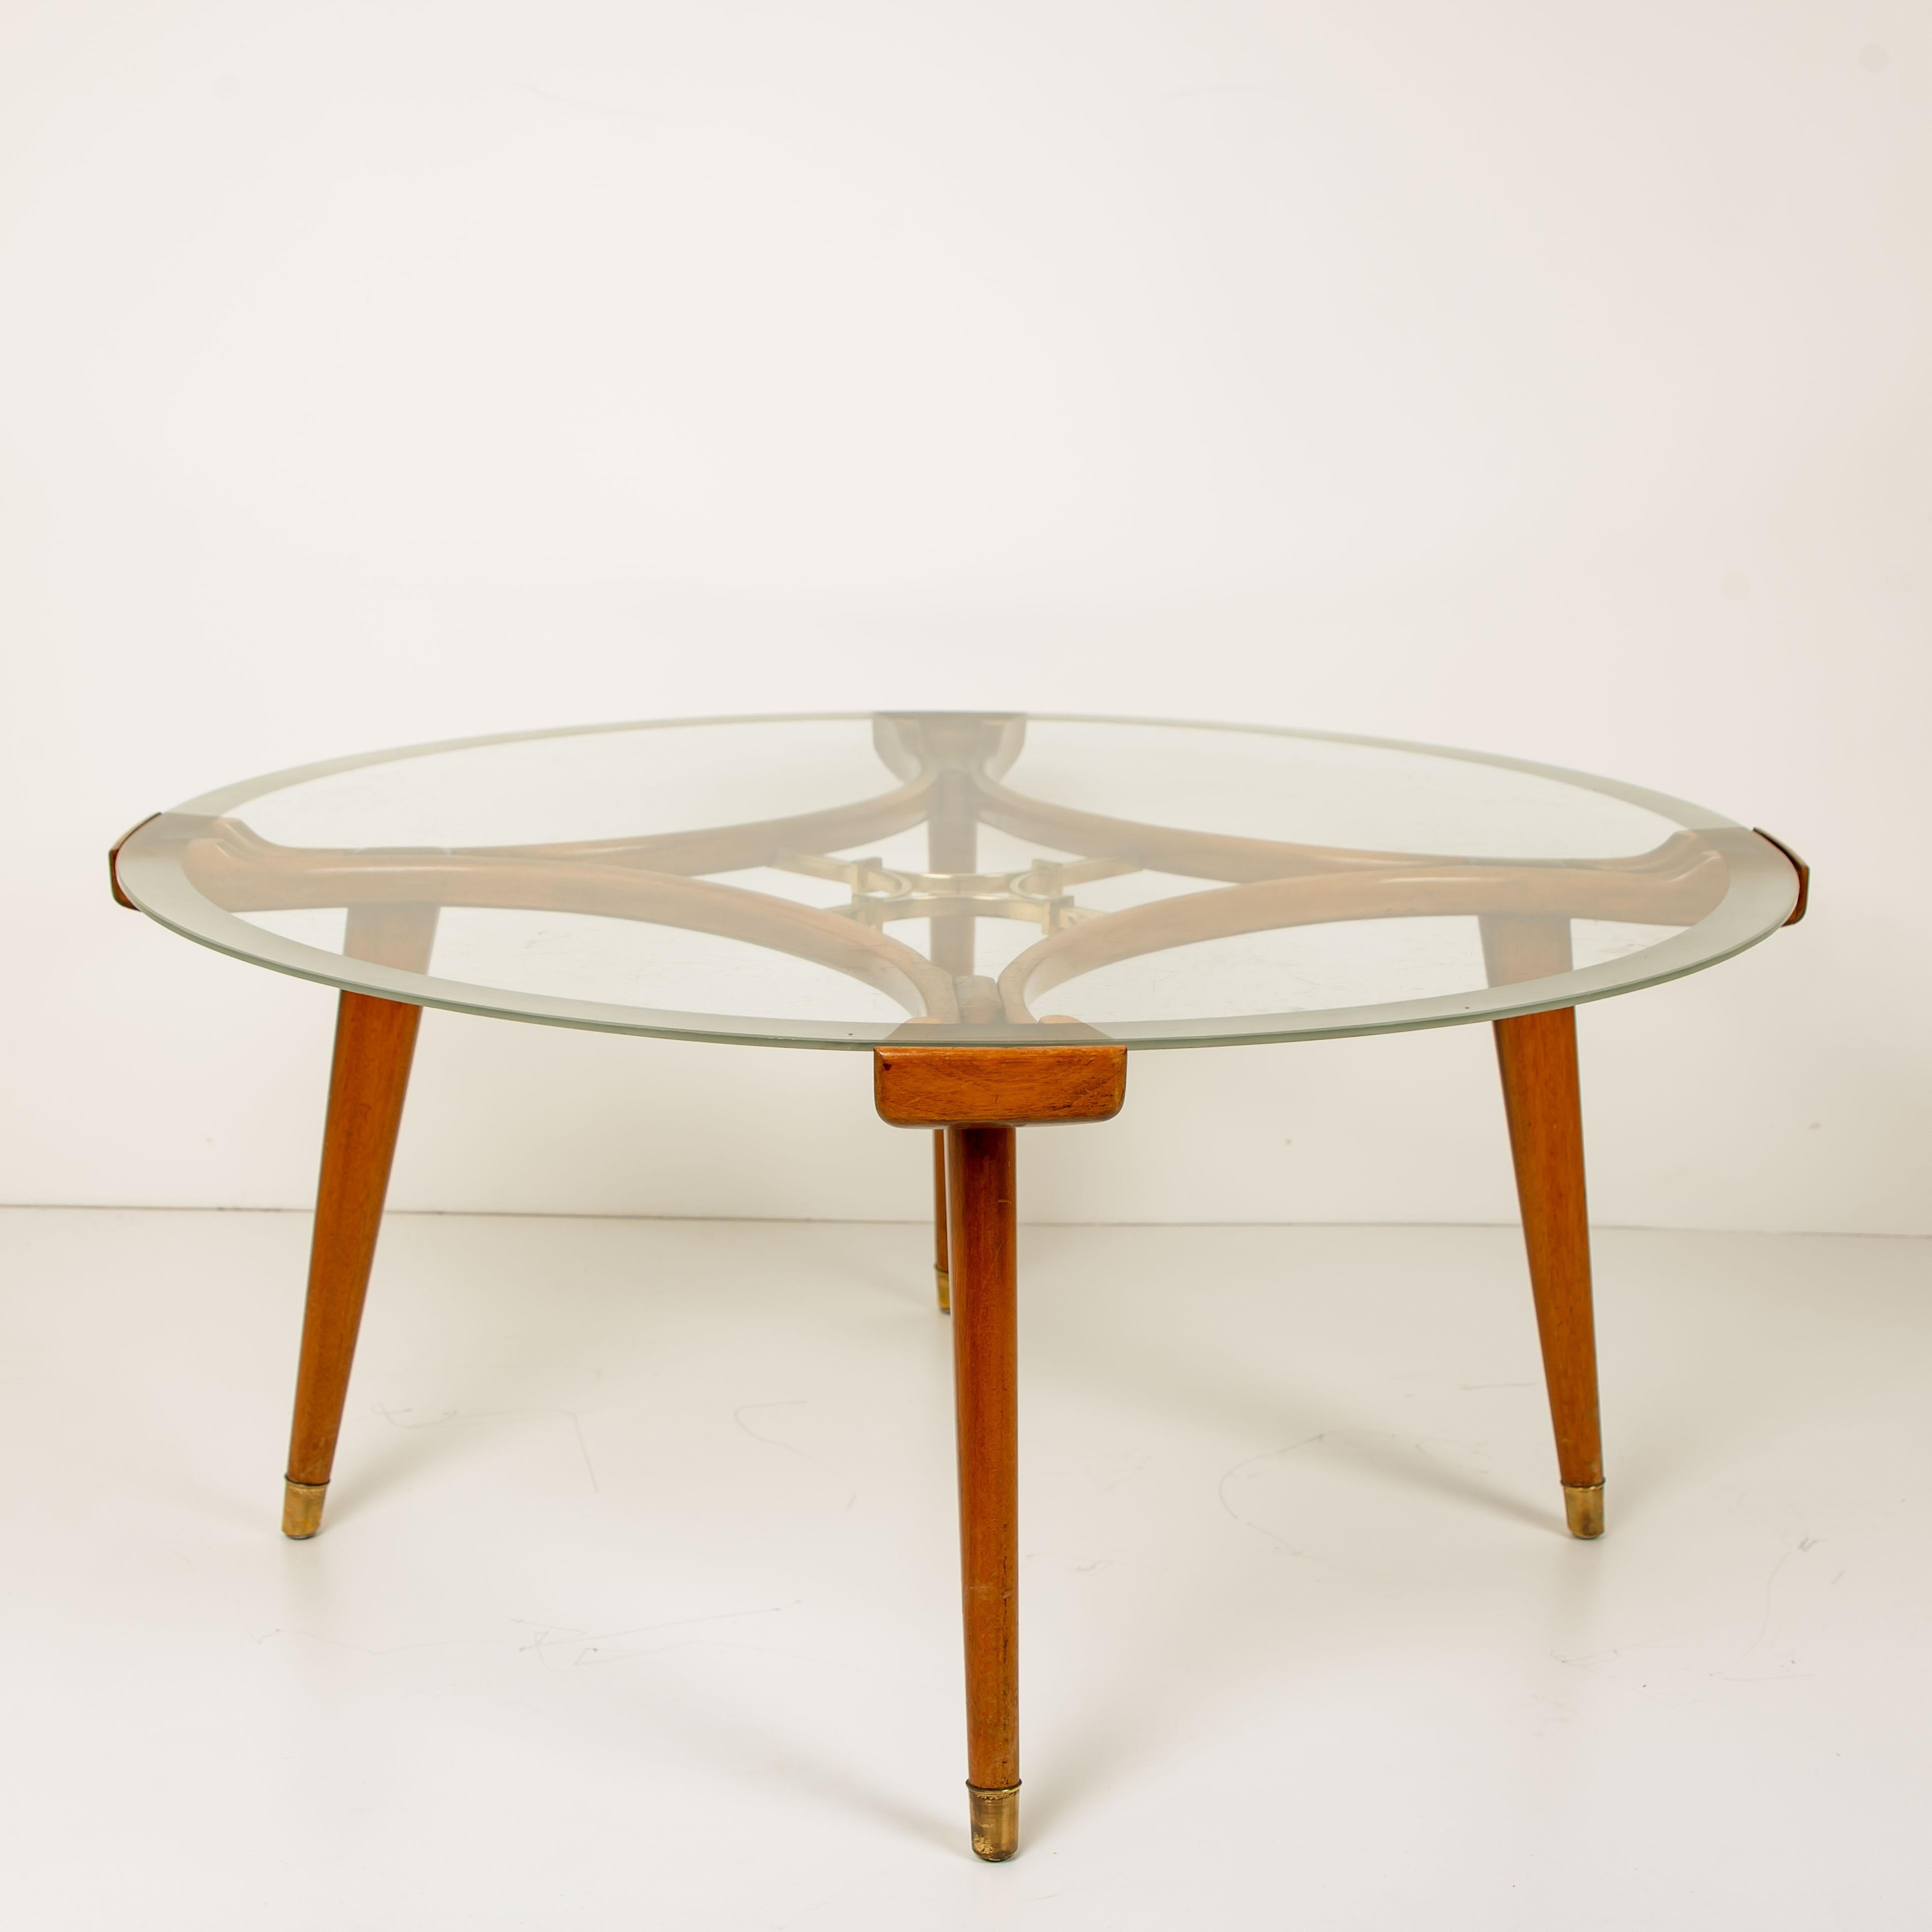 Solid Brass Walnut Glass Table, by William Watting, Produced by Fristho, 1950s For Sale 5